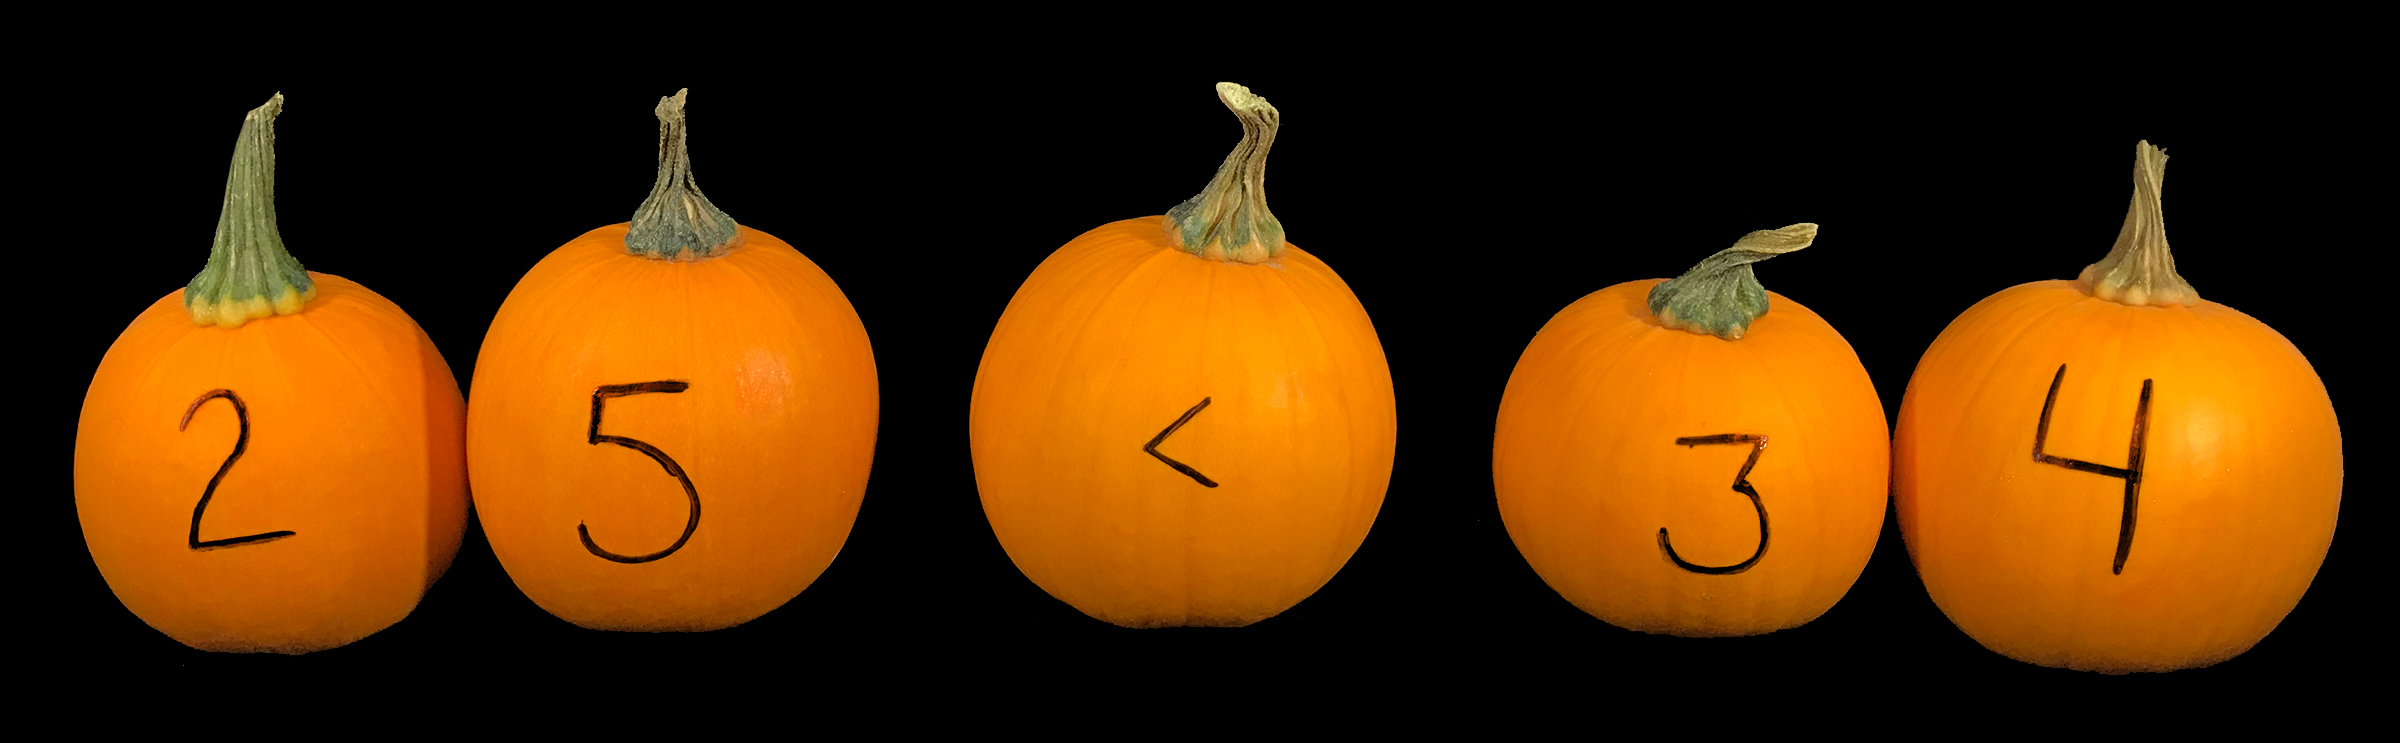 Comparing Numbers with Pumpkins